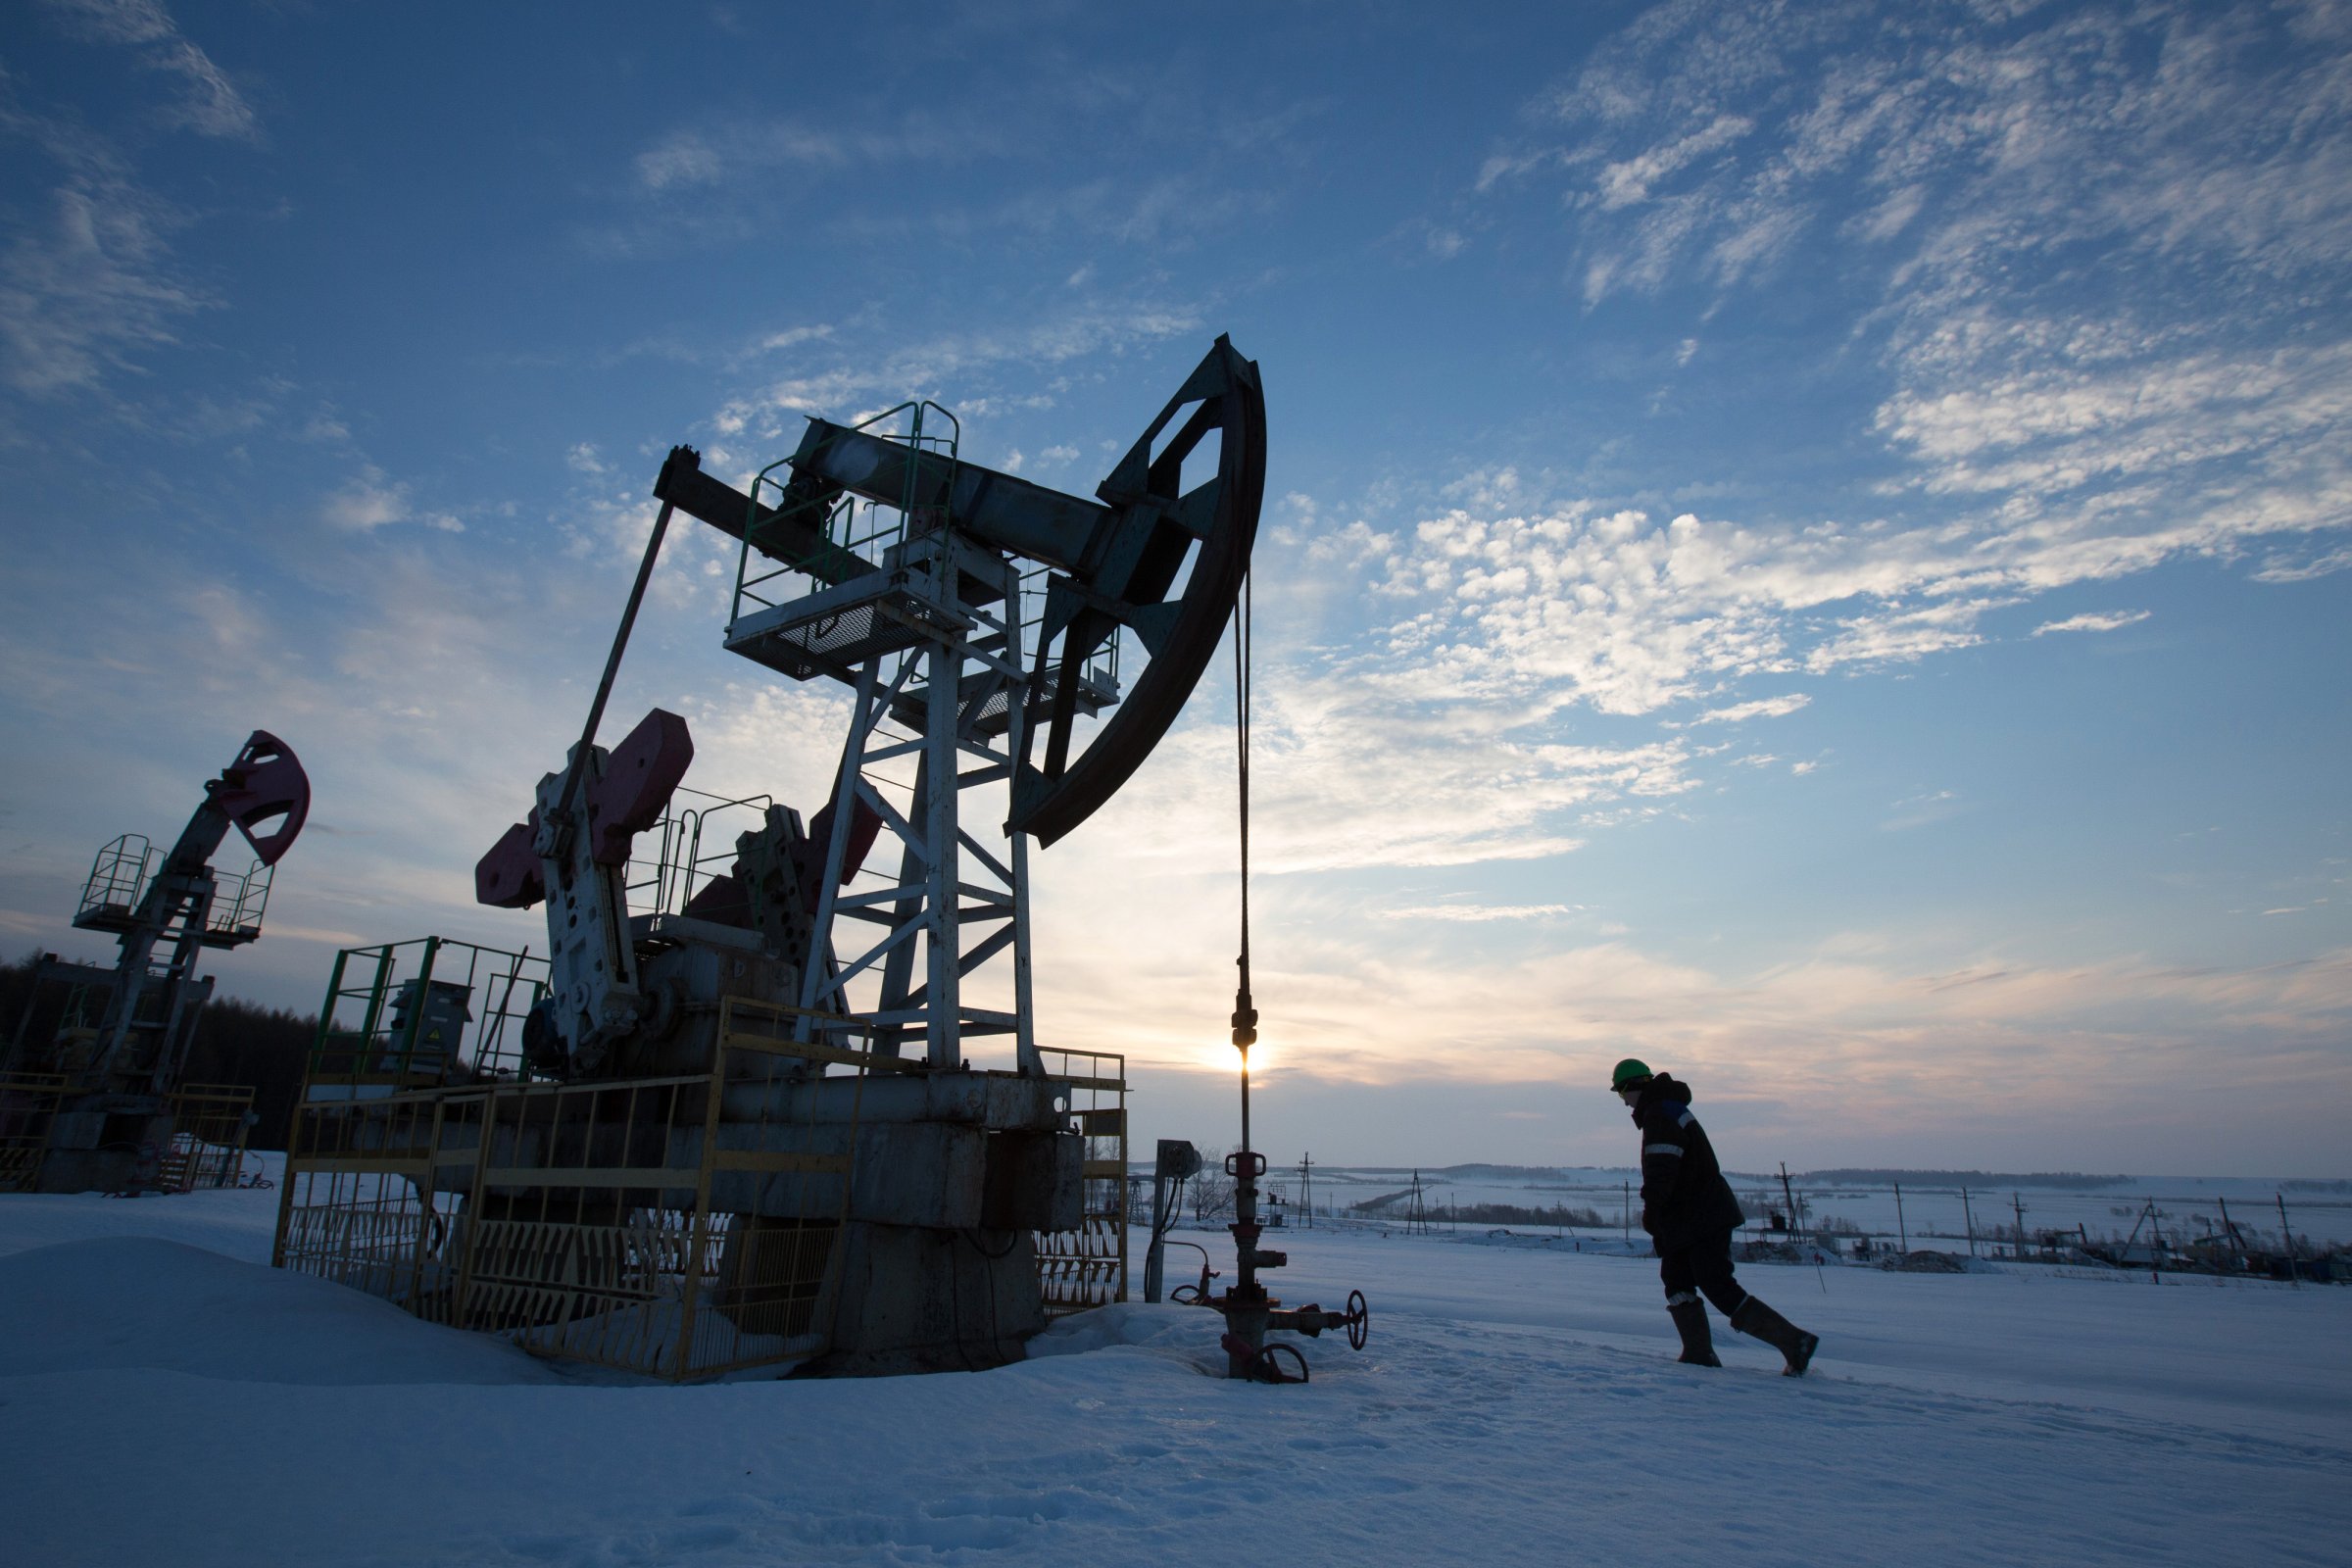 An oil worker inspects a pumping jack, also known as a 'nodding donkey,' during drilling operations in an oilfield operated by Bashneft PAO in the village of Otrada, 150kms from Ufa, Russia, on Saturday, March 5, 2016.